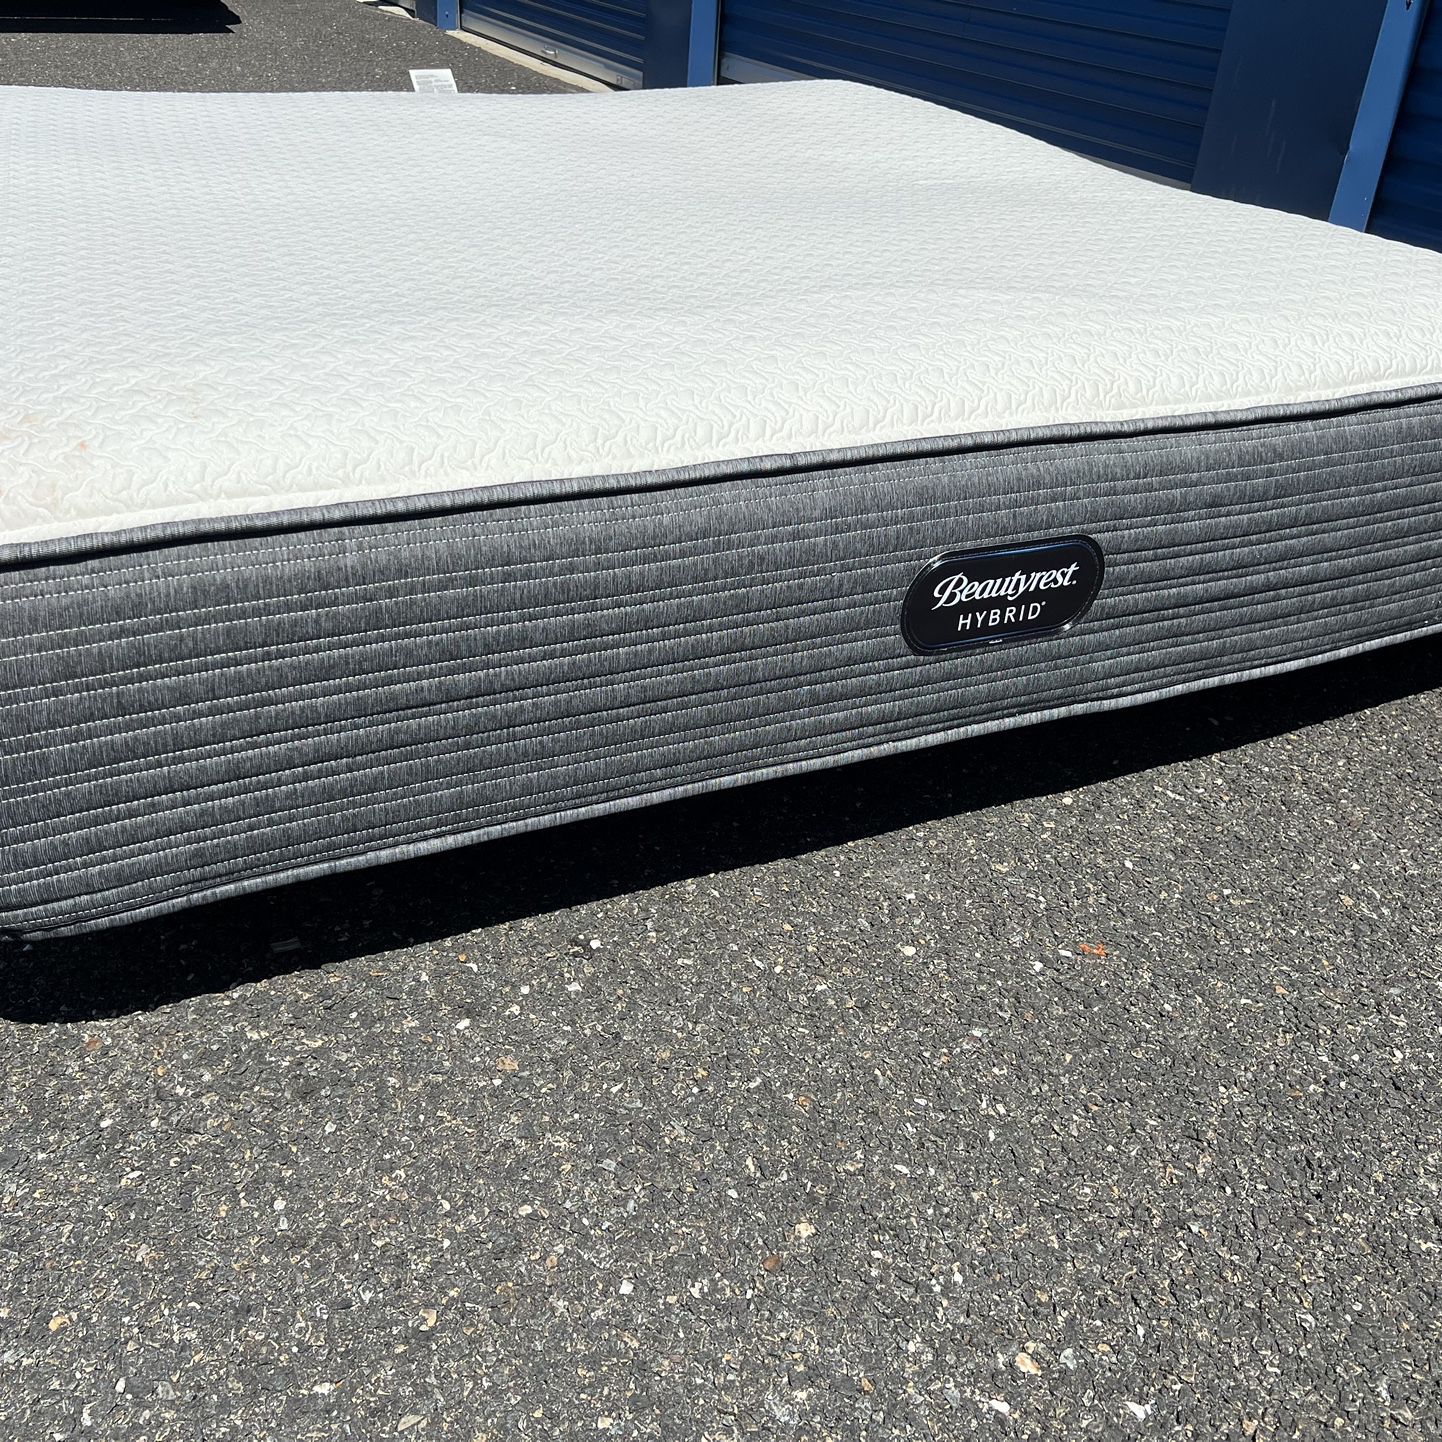 Soft Mattress King Size Mattress King Mattress ! Simmons Beautyrest Silver ! King bed ! Free Delivery